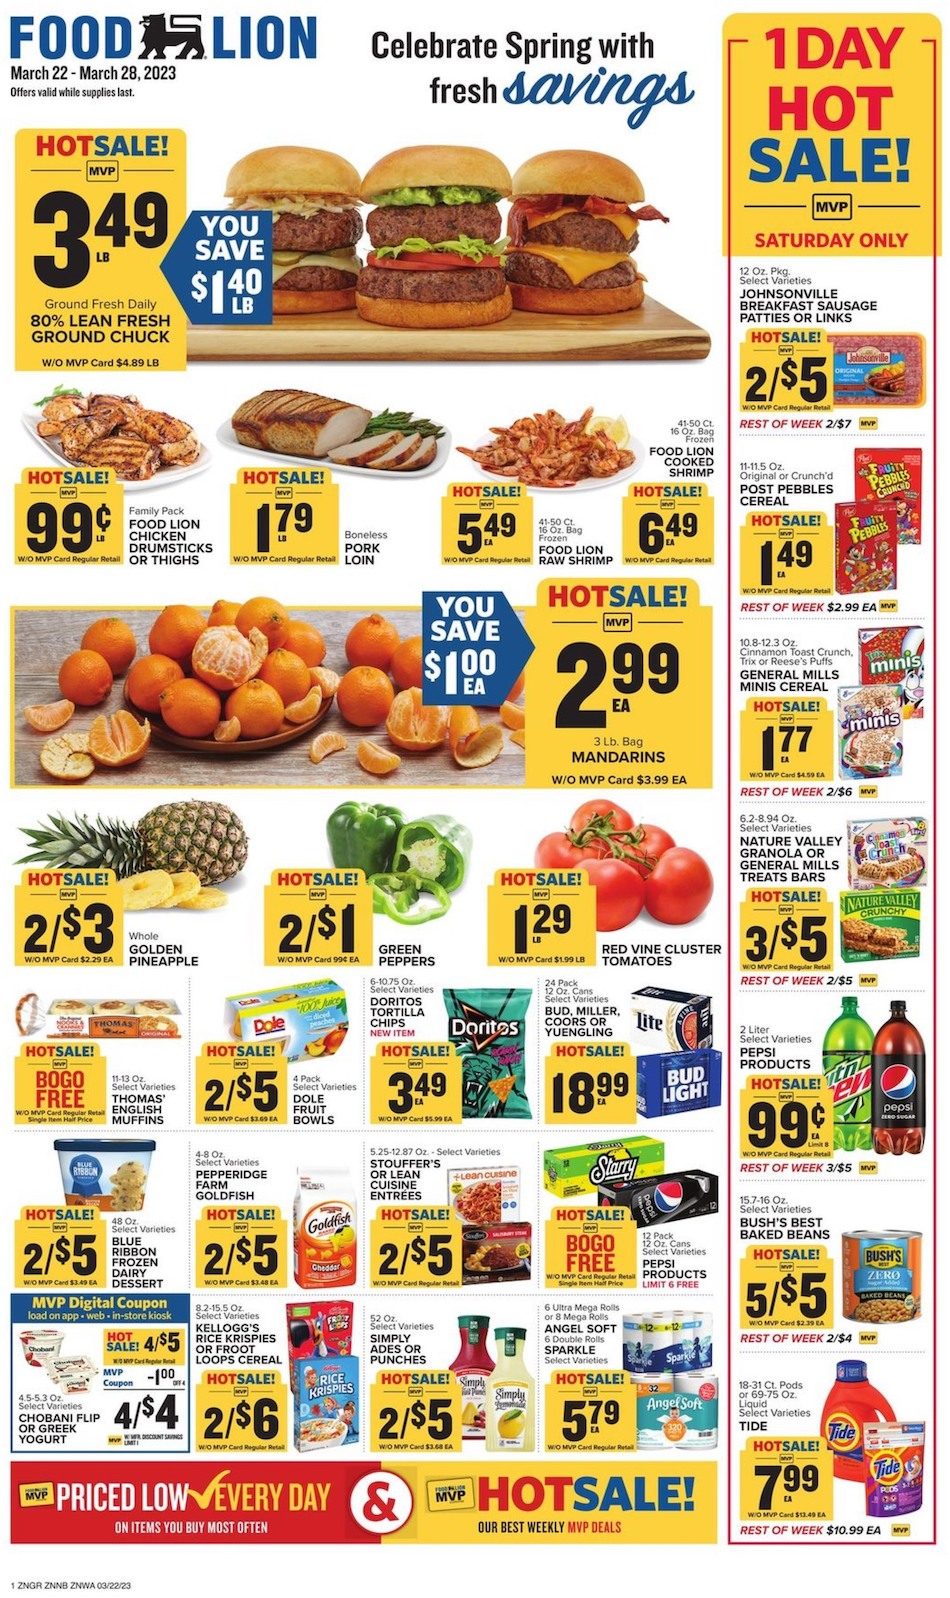 Food Lion Weekly Ad Sale Mar 22nd – 28th March 2023 Page 1